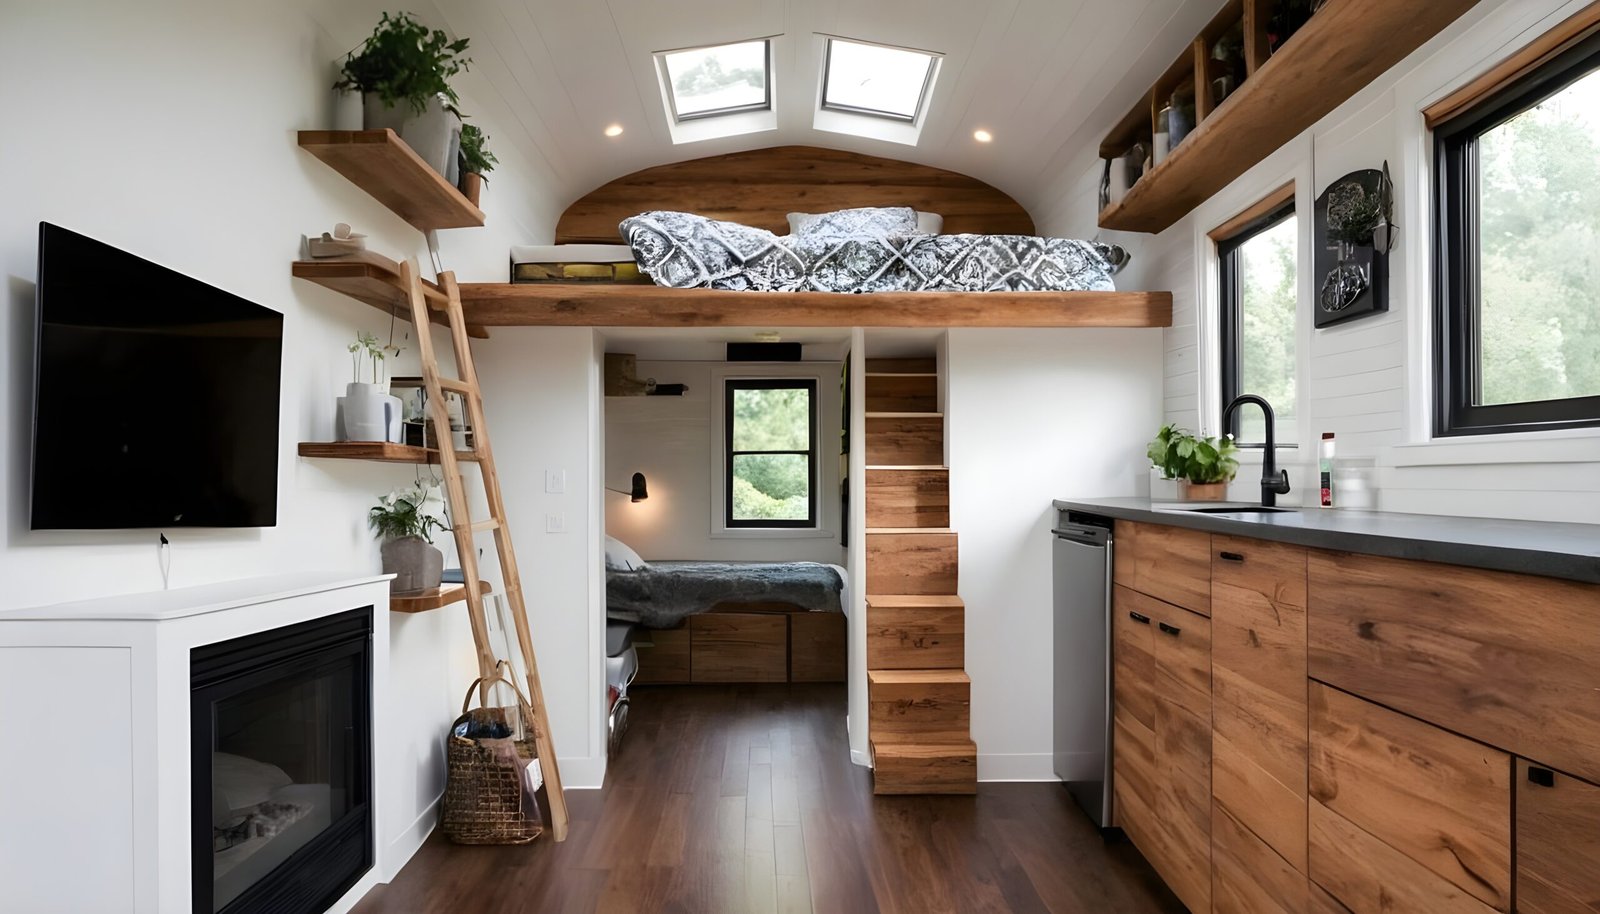 Luxury tiny home with built-in storage solutions.